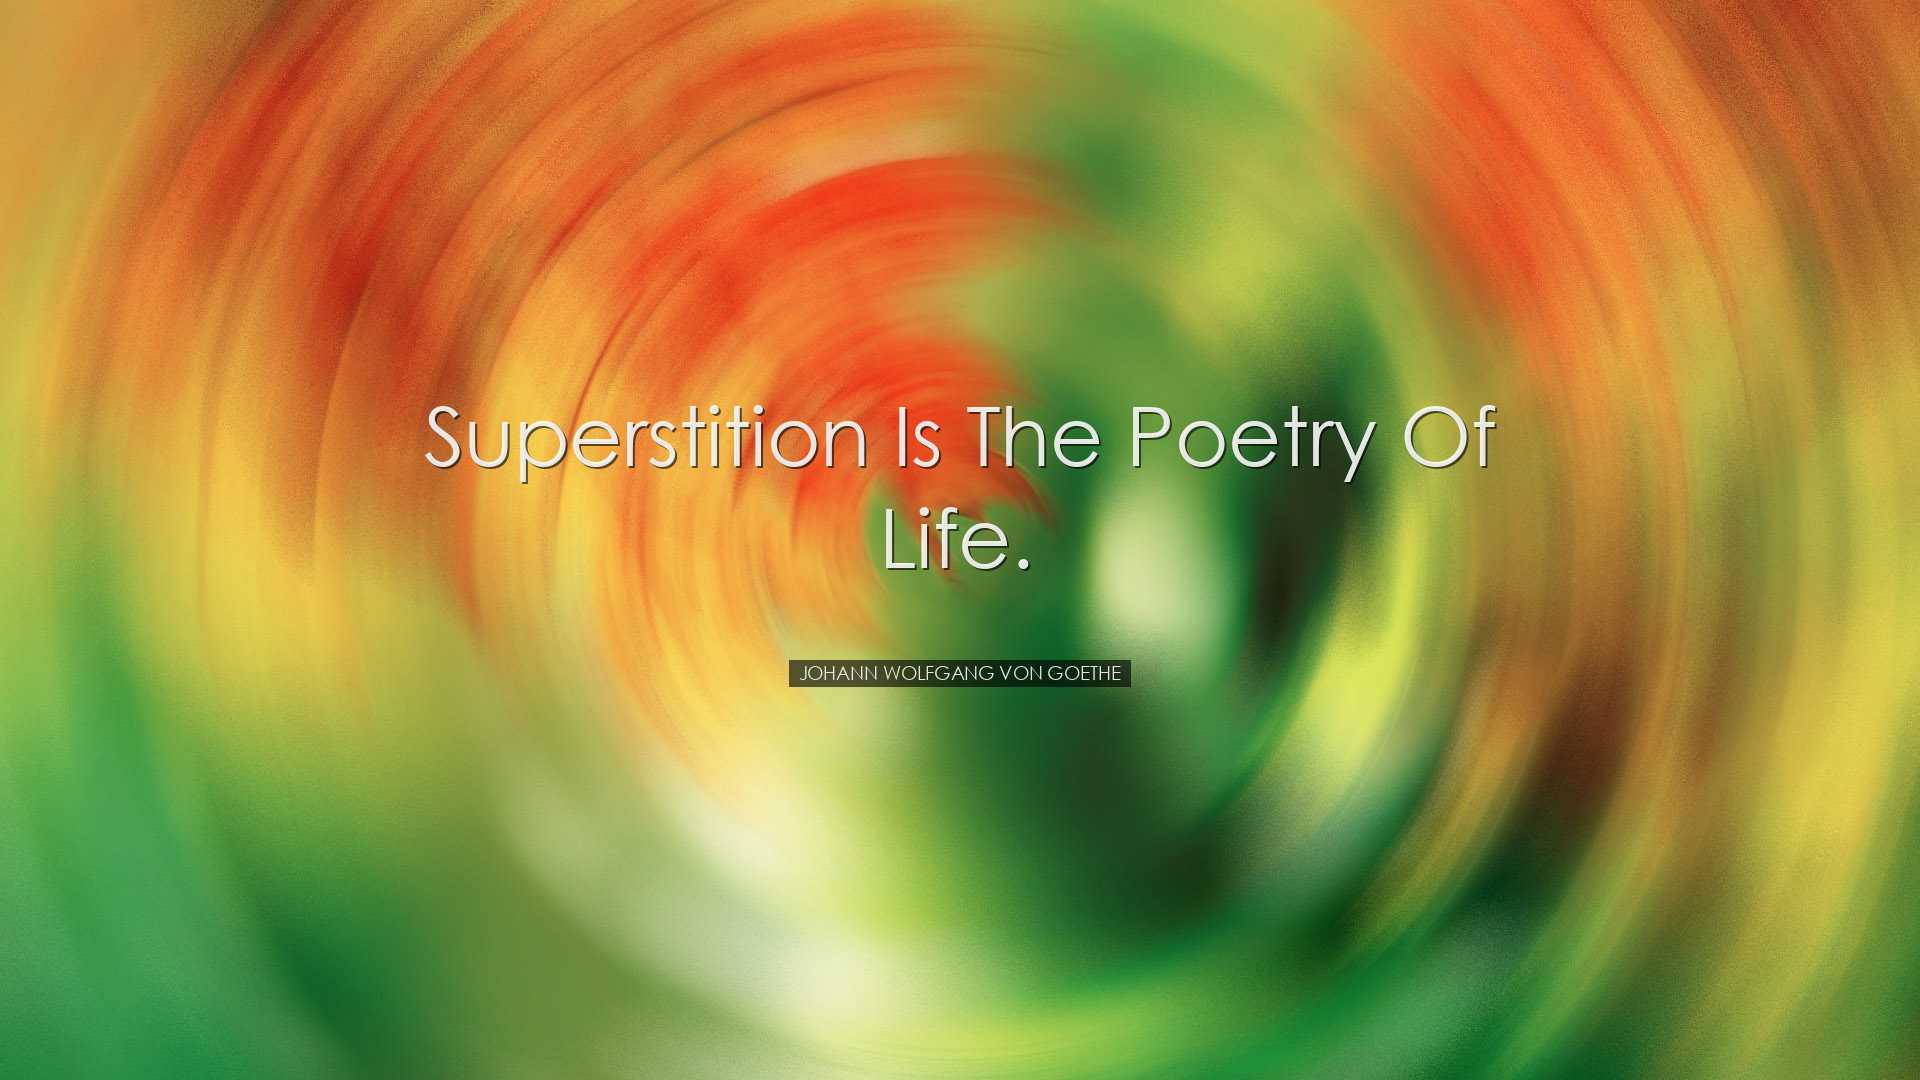 Superstition is the poetry of life. - Johann Wolfgang von Goethe